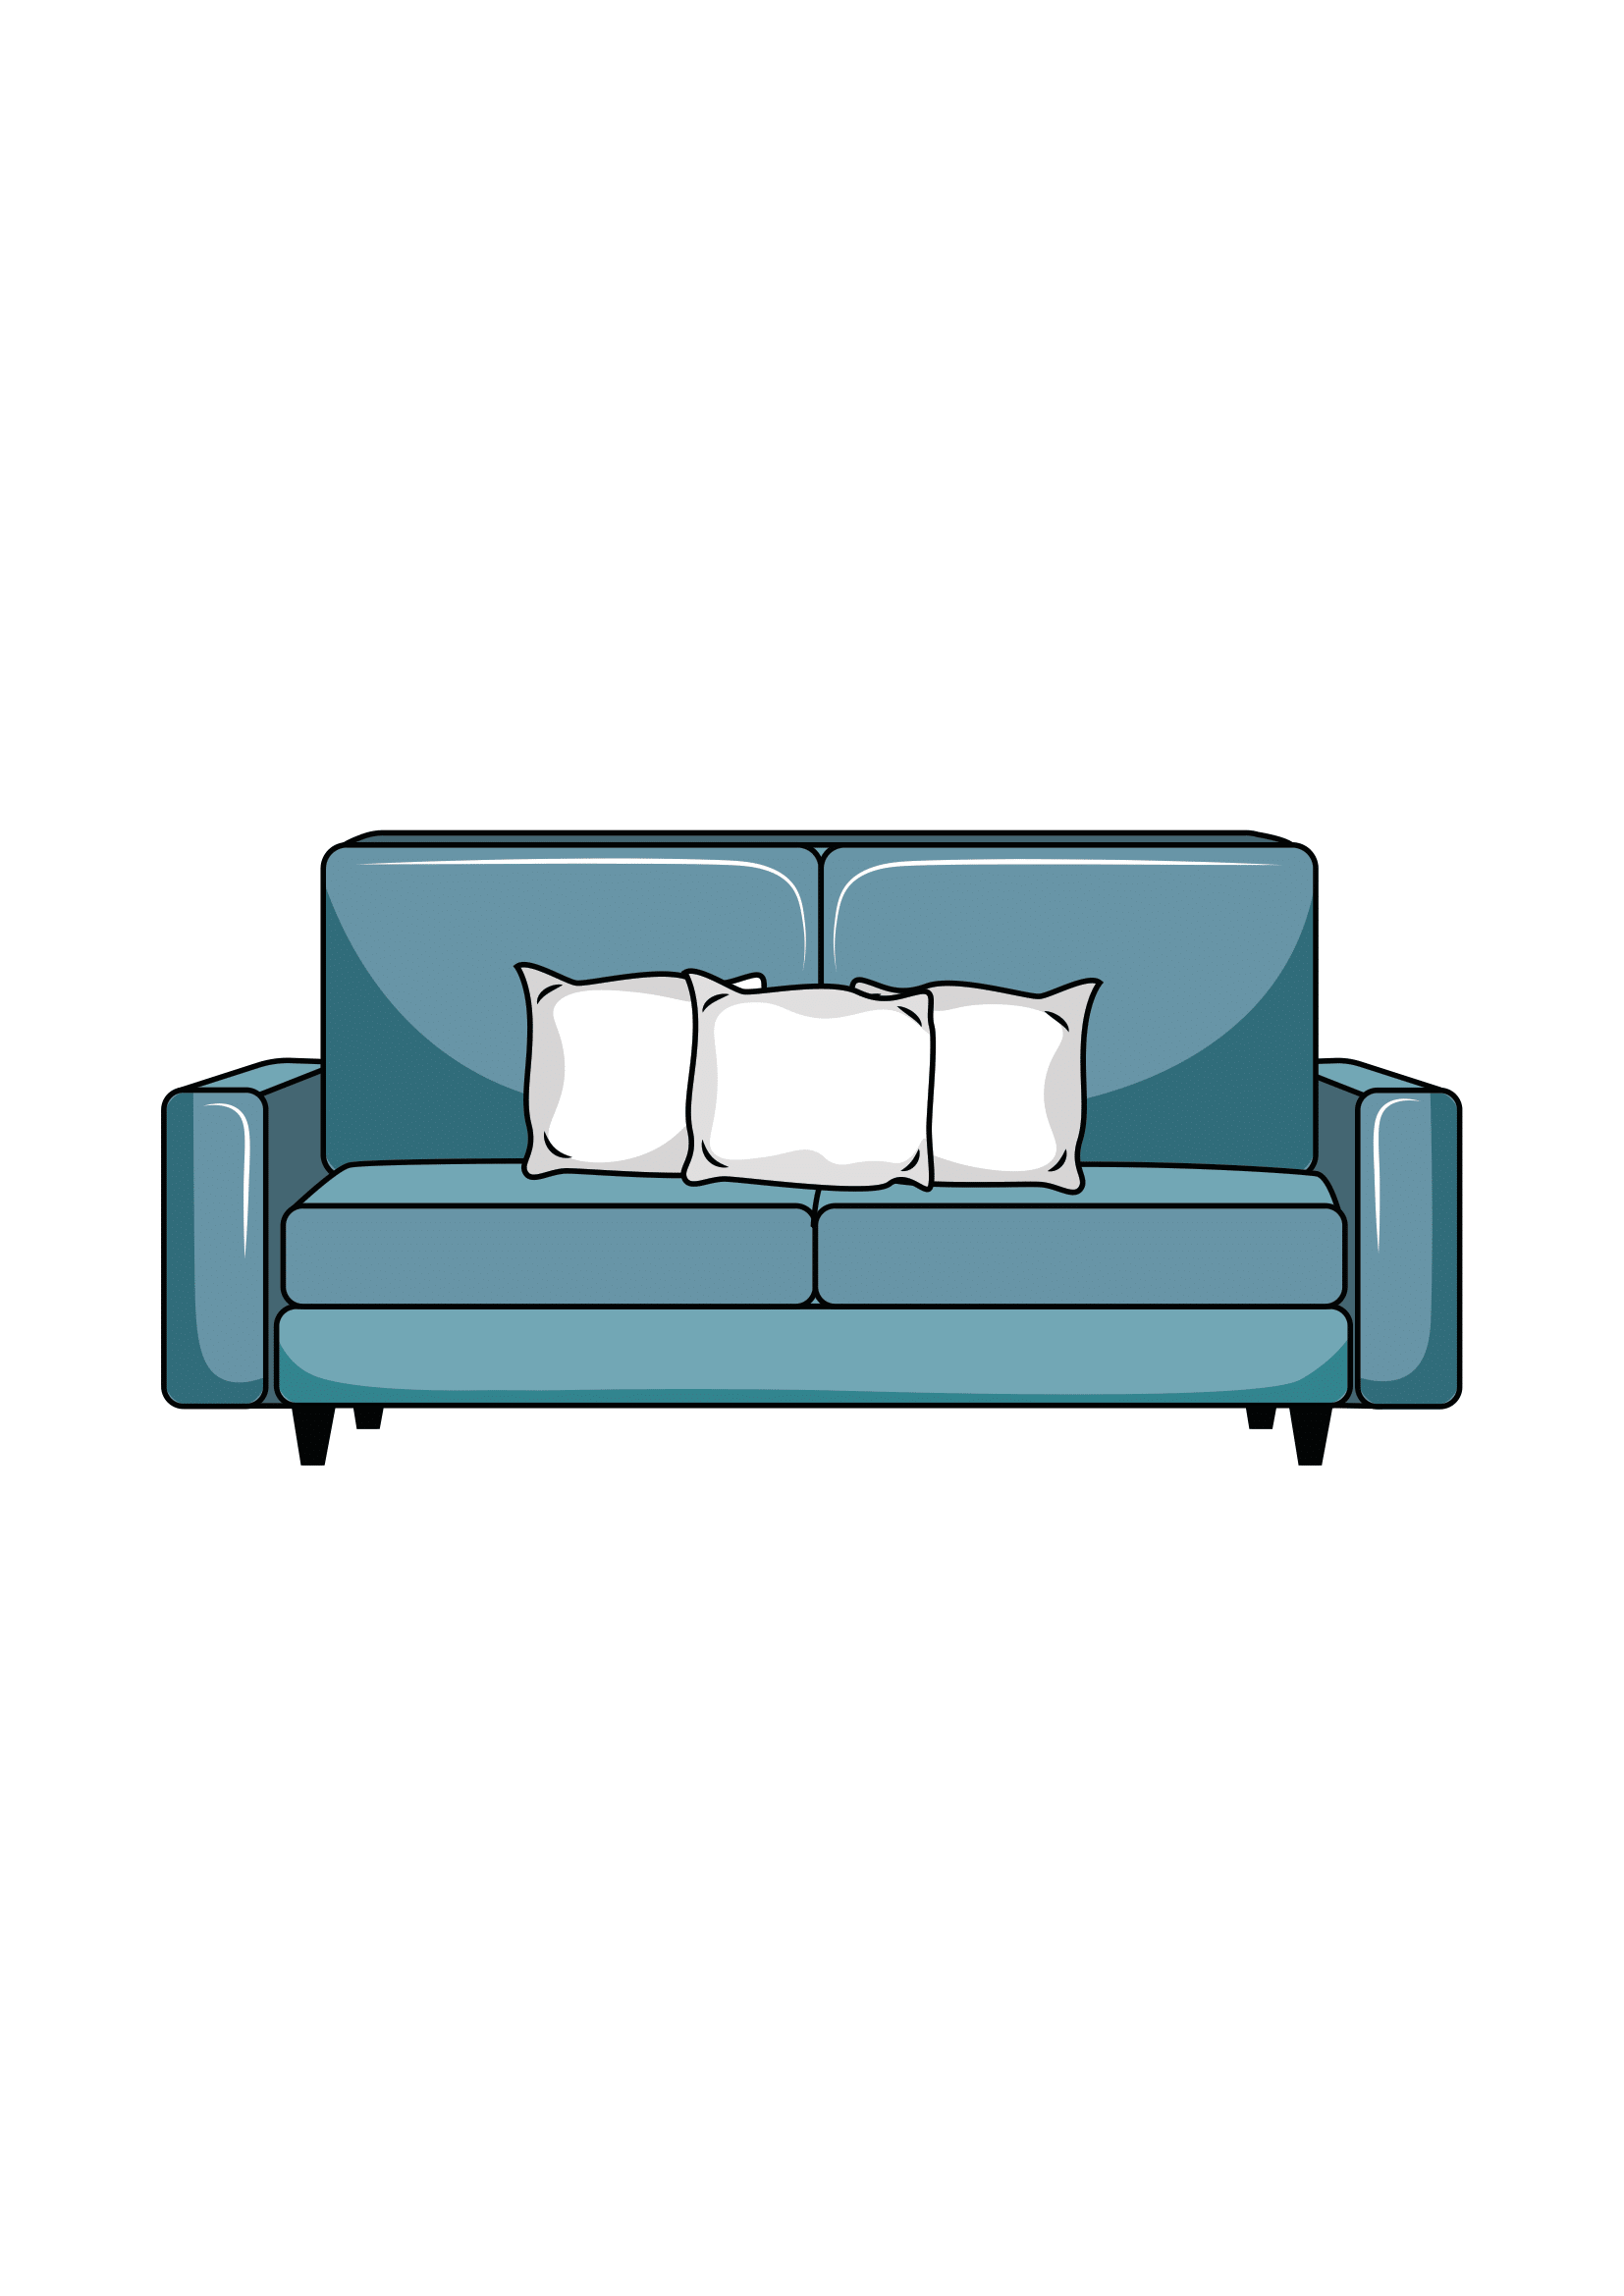 How to Draw A Couch Step by Step Printable